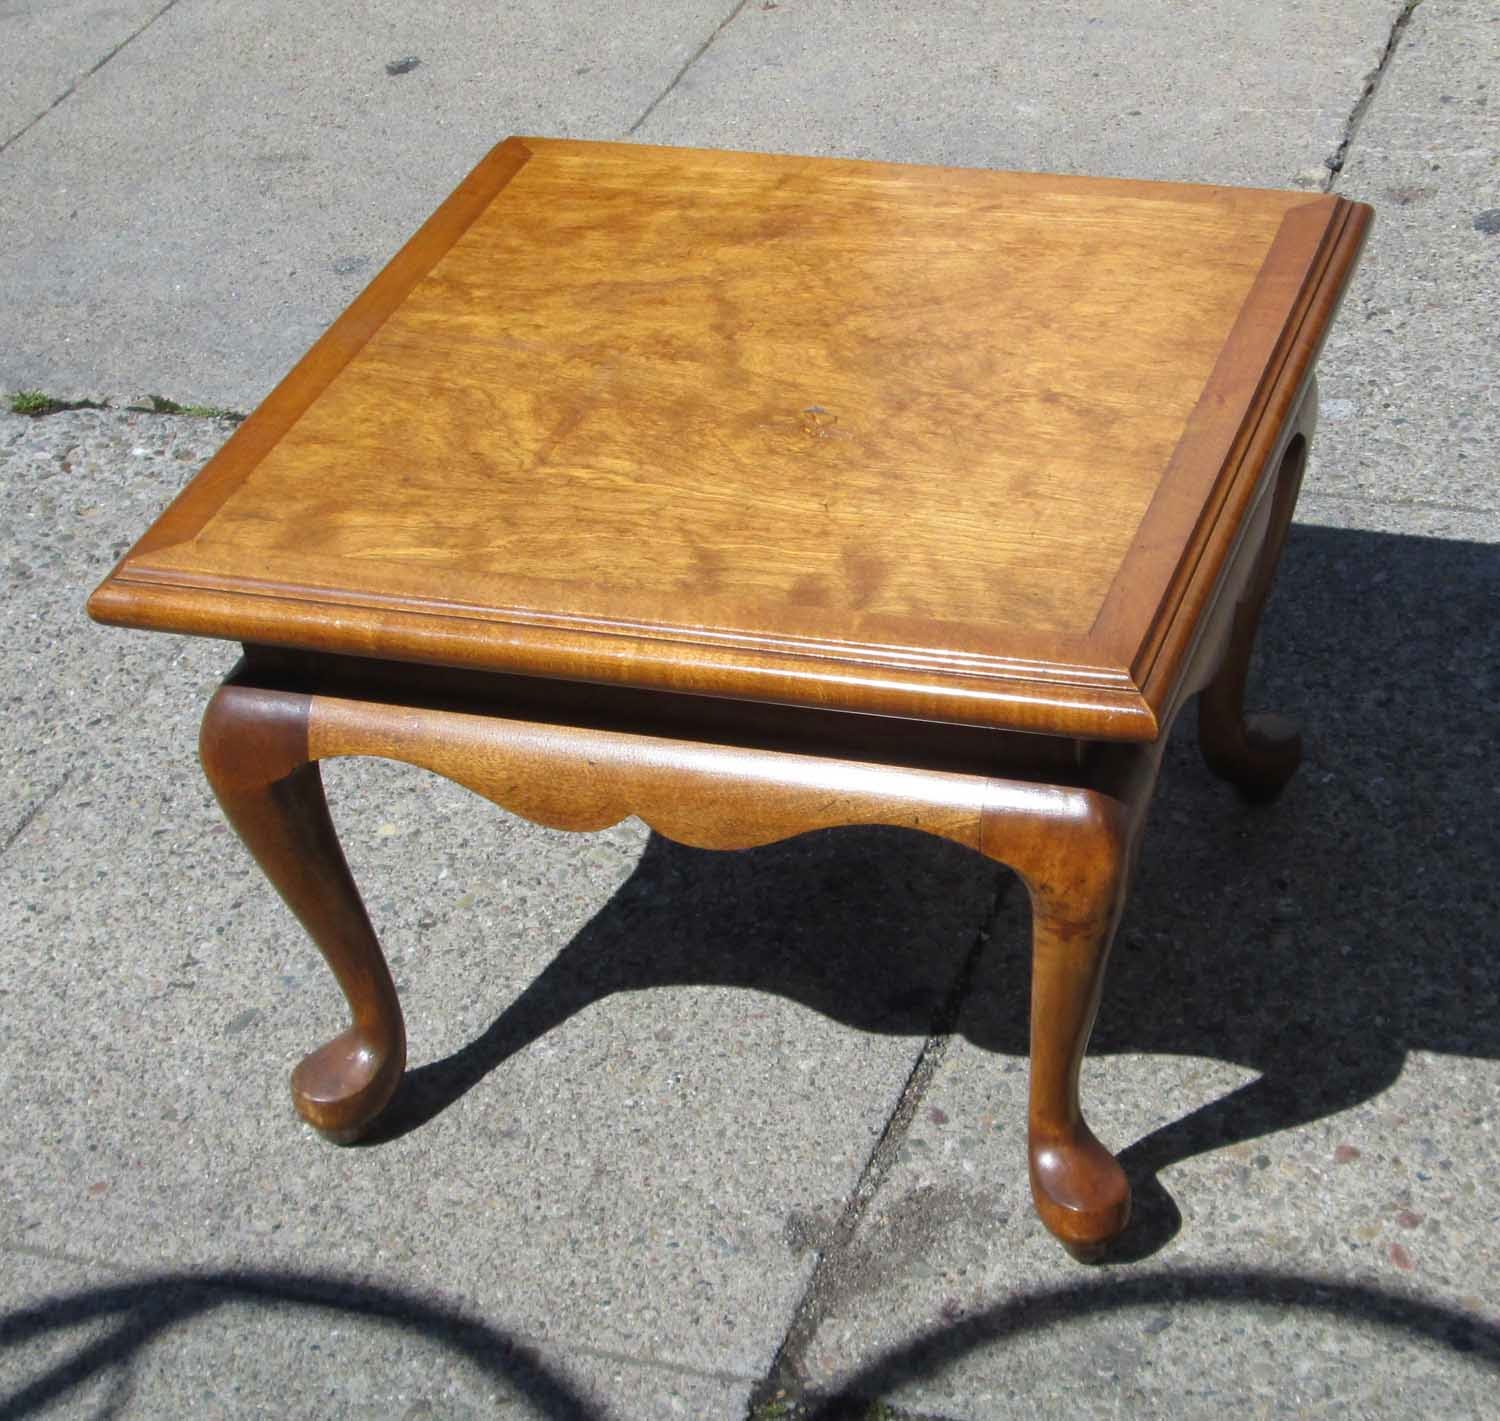 UHURU FURNITURE & COLLECTIBLES: SOLD Wood End Table with Cabriole Legs